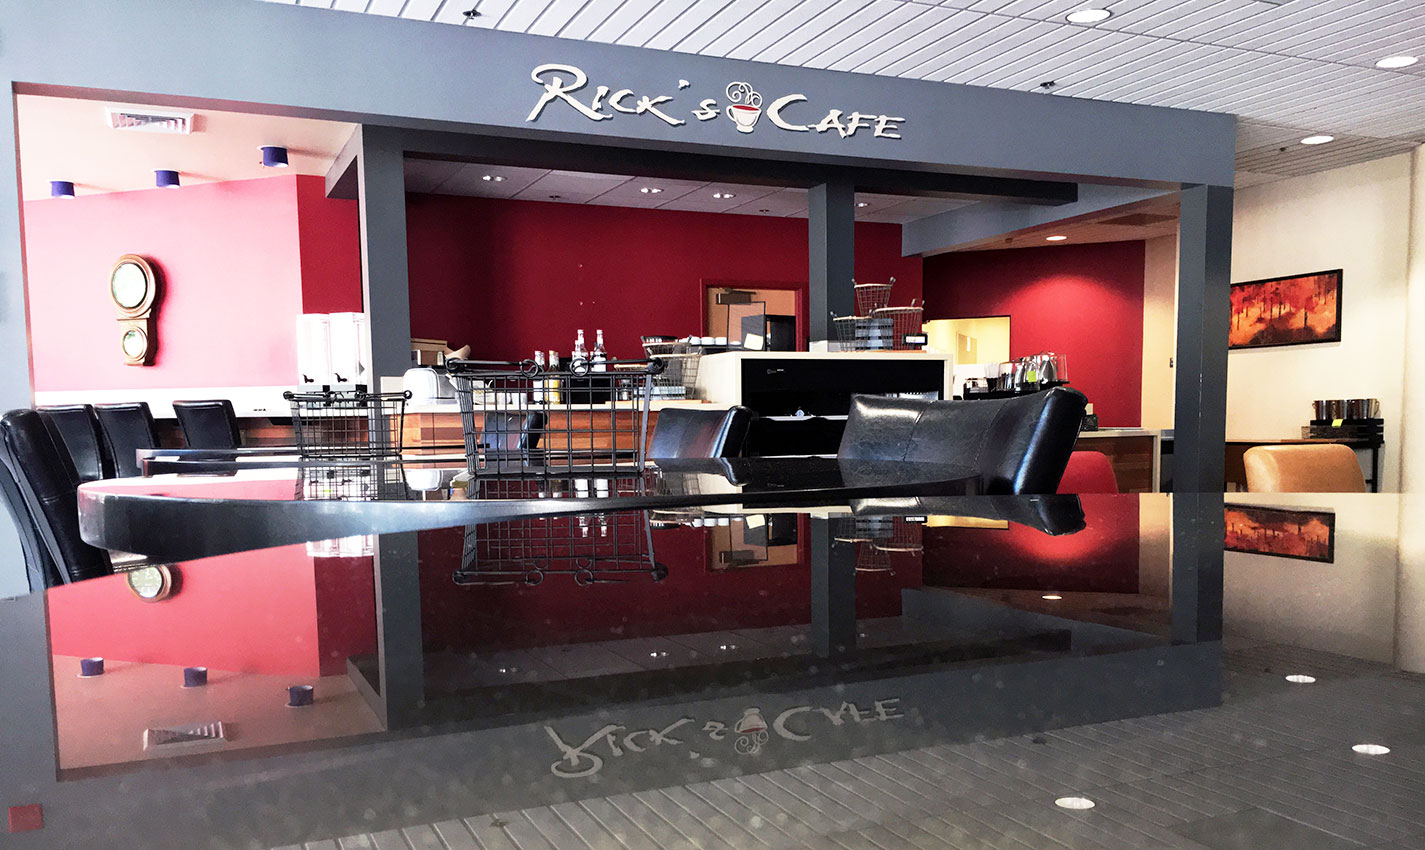 Rick's Cafe at the College of Law